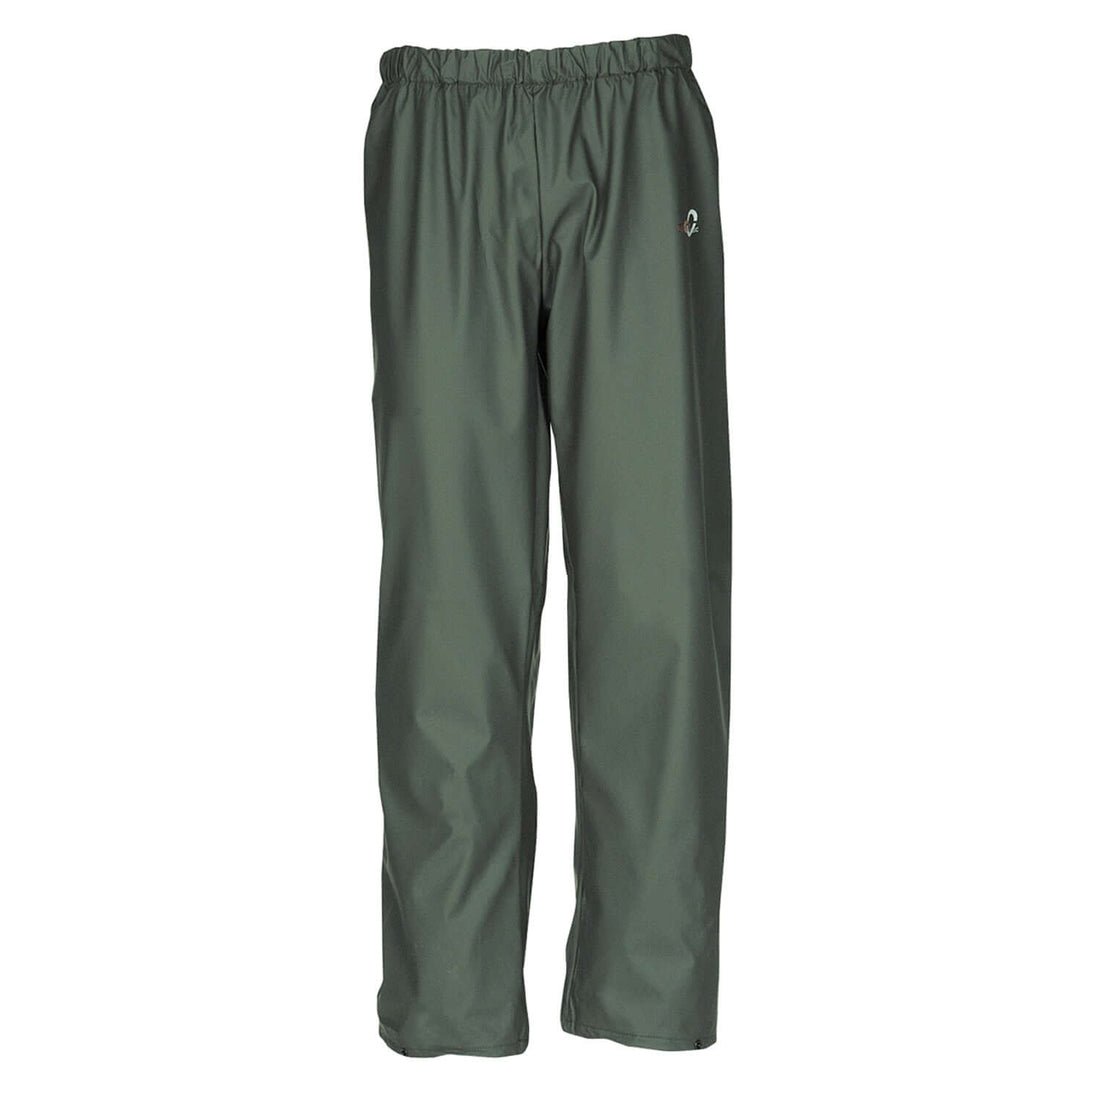 Flexothane Classic Rotterdam Trousers in Olive Green